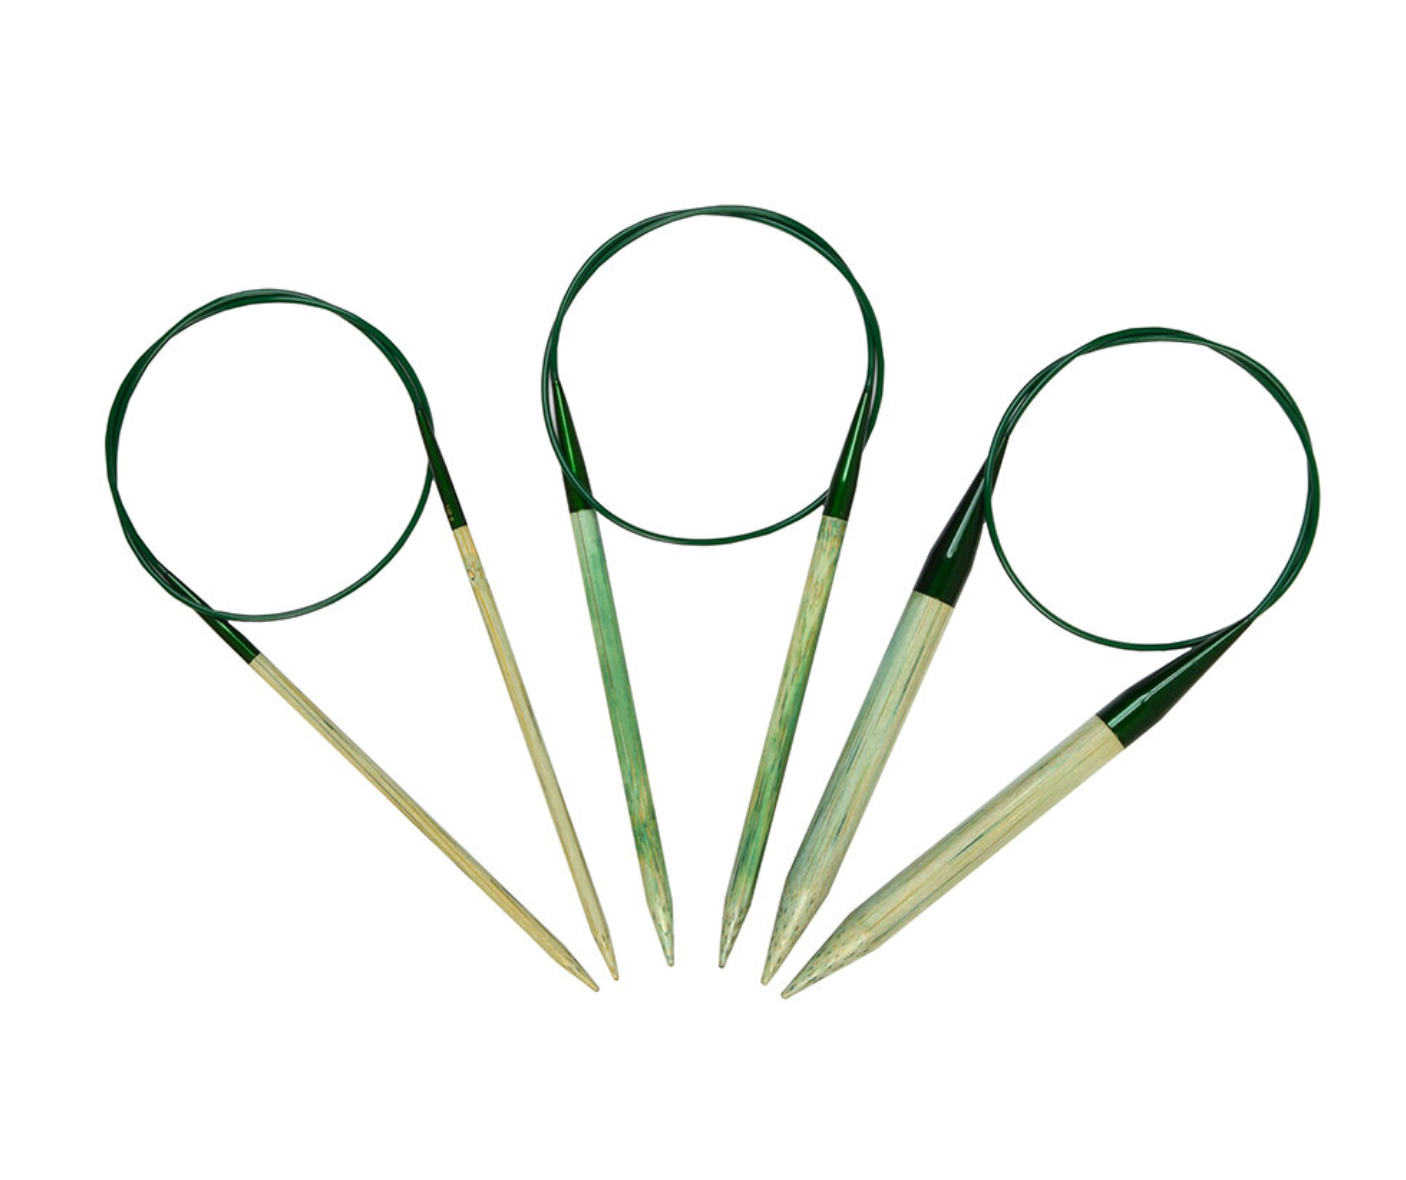 Clover Bamboo Circular Knitting Needles 24 Size 11 for sale